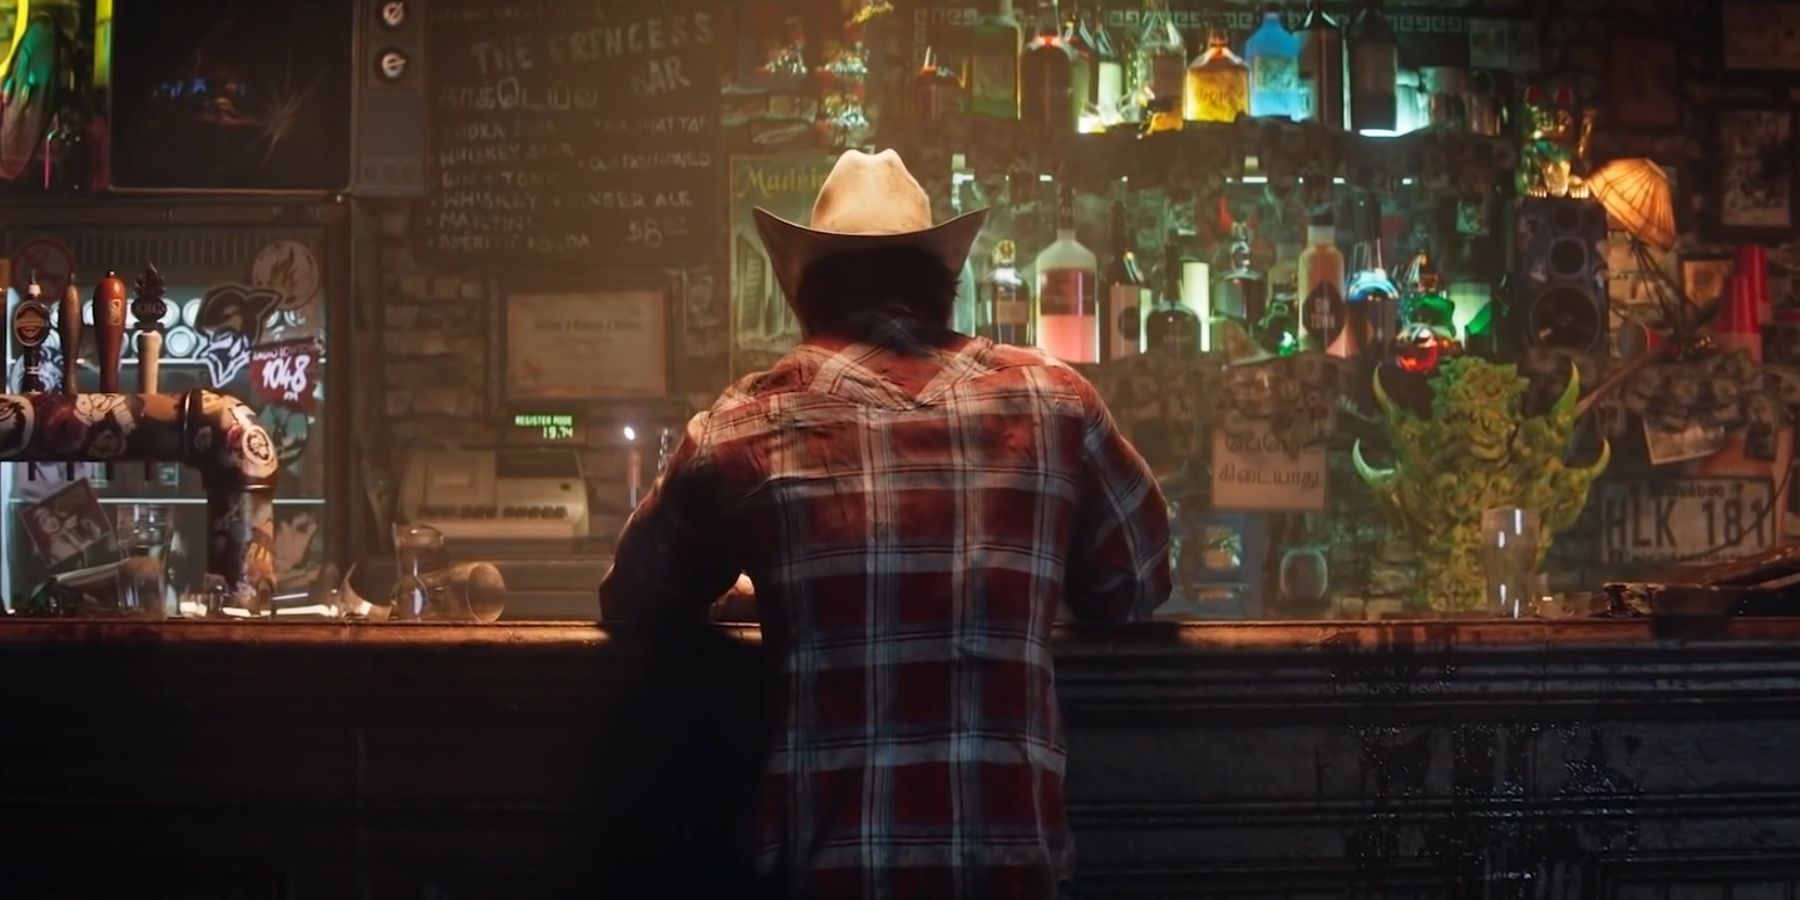 Wolver sitting at the bar in a cowboy hat